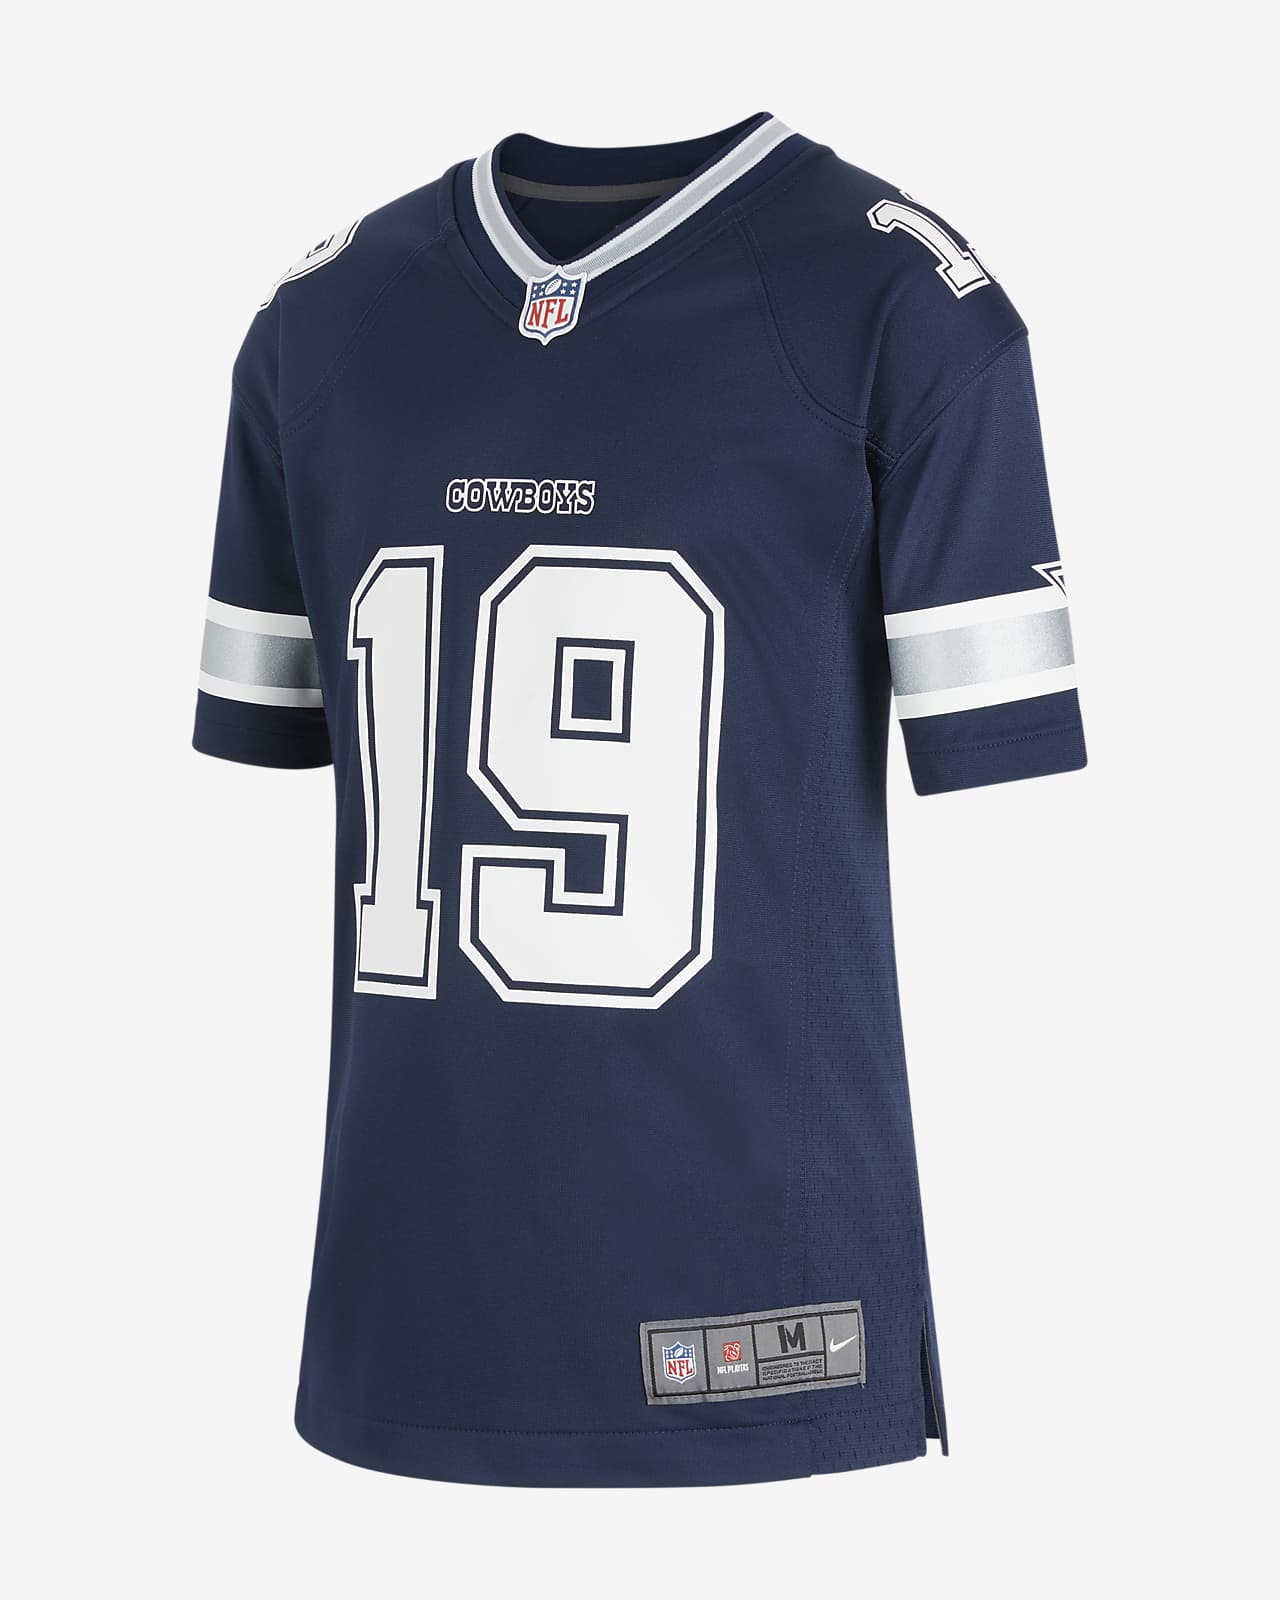 youth dallas cowboys jersey, OFF 71%,Cheap price!